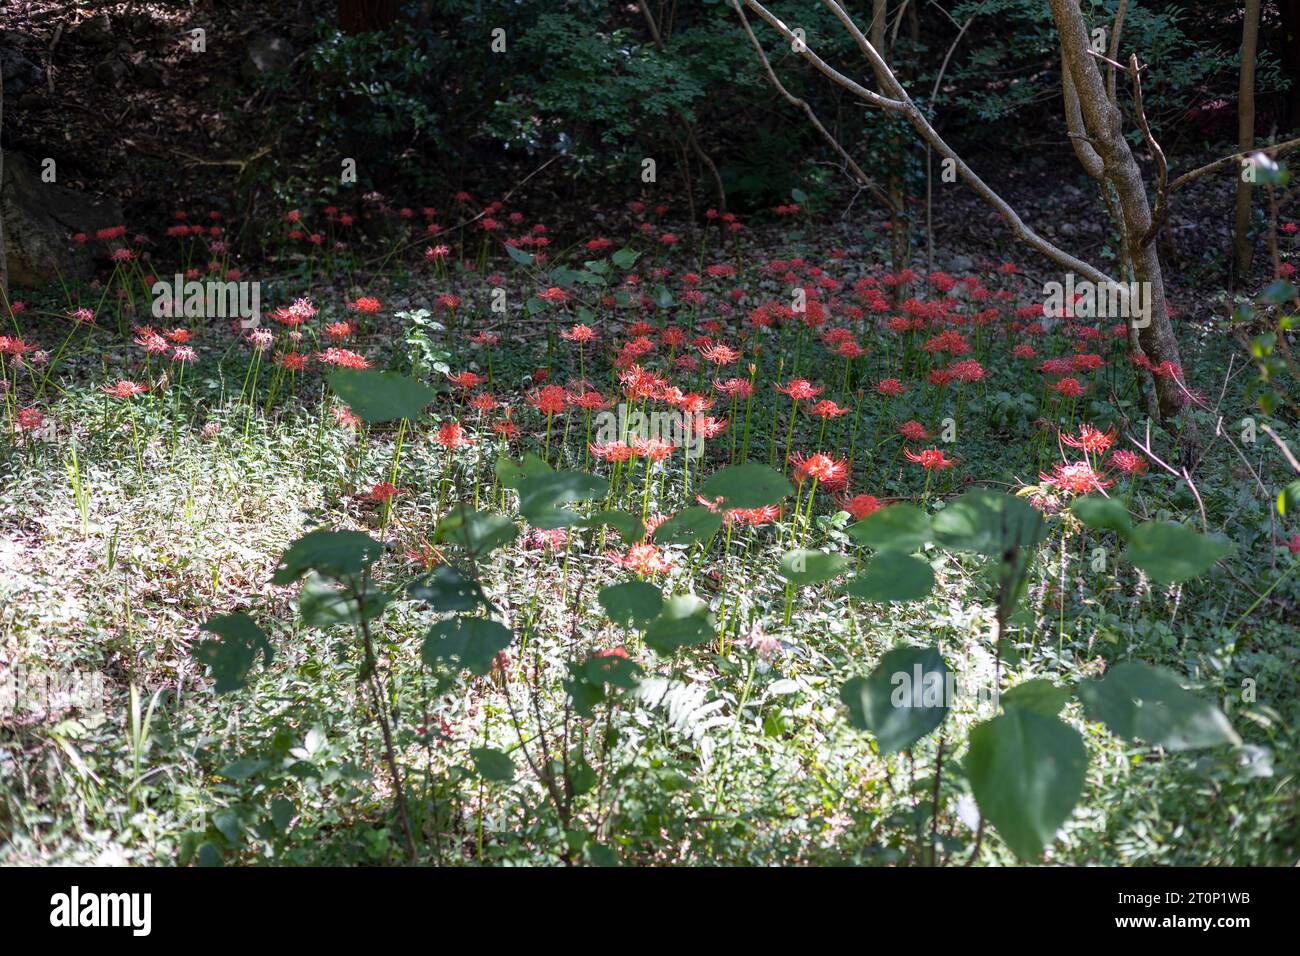 A fairytale forest garden filled with red flowers Stock Photo